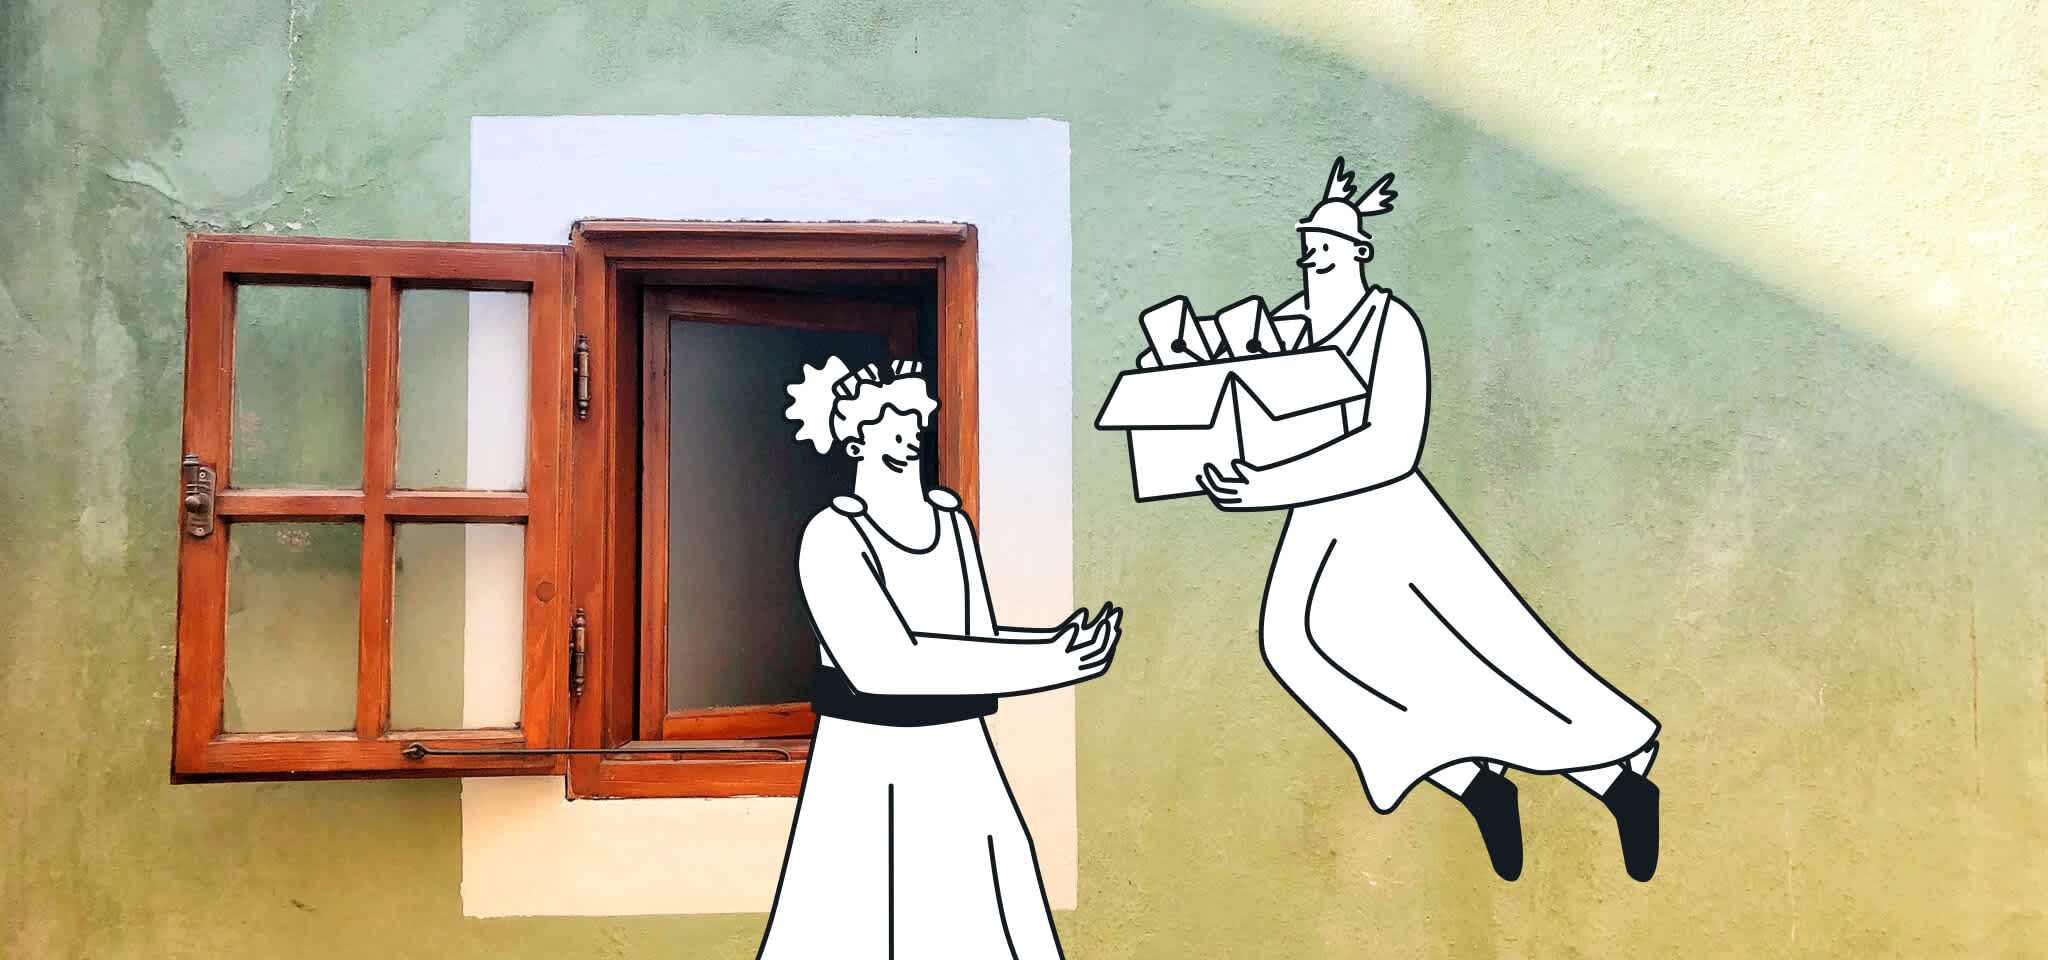 Hermes carries a box of letters to a Goddess in front of a wooden window